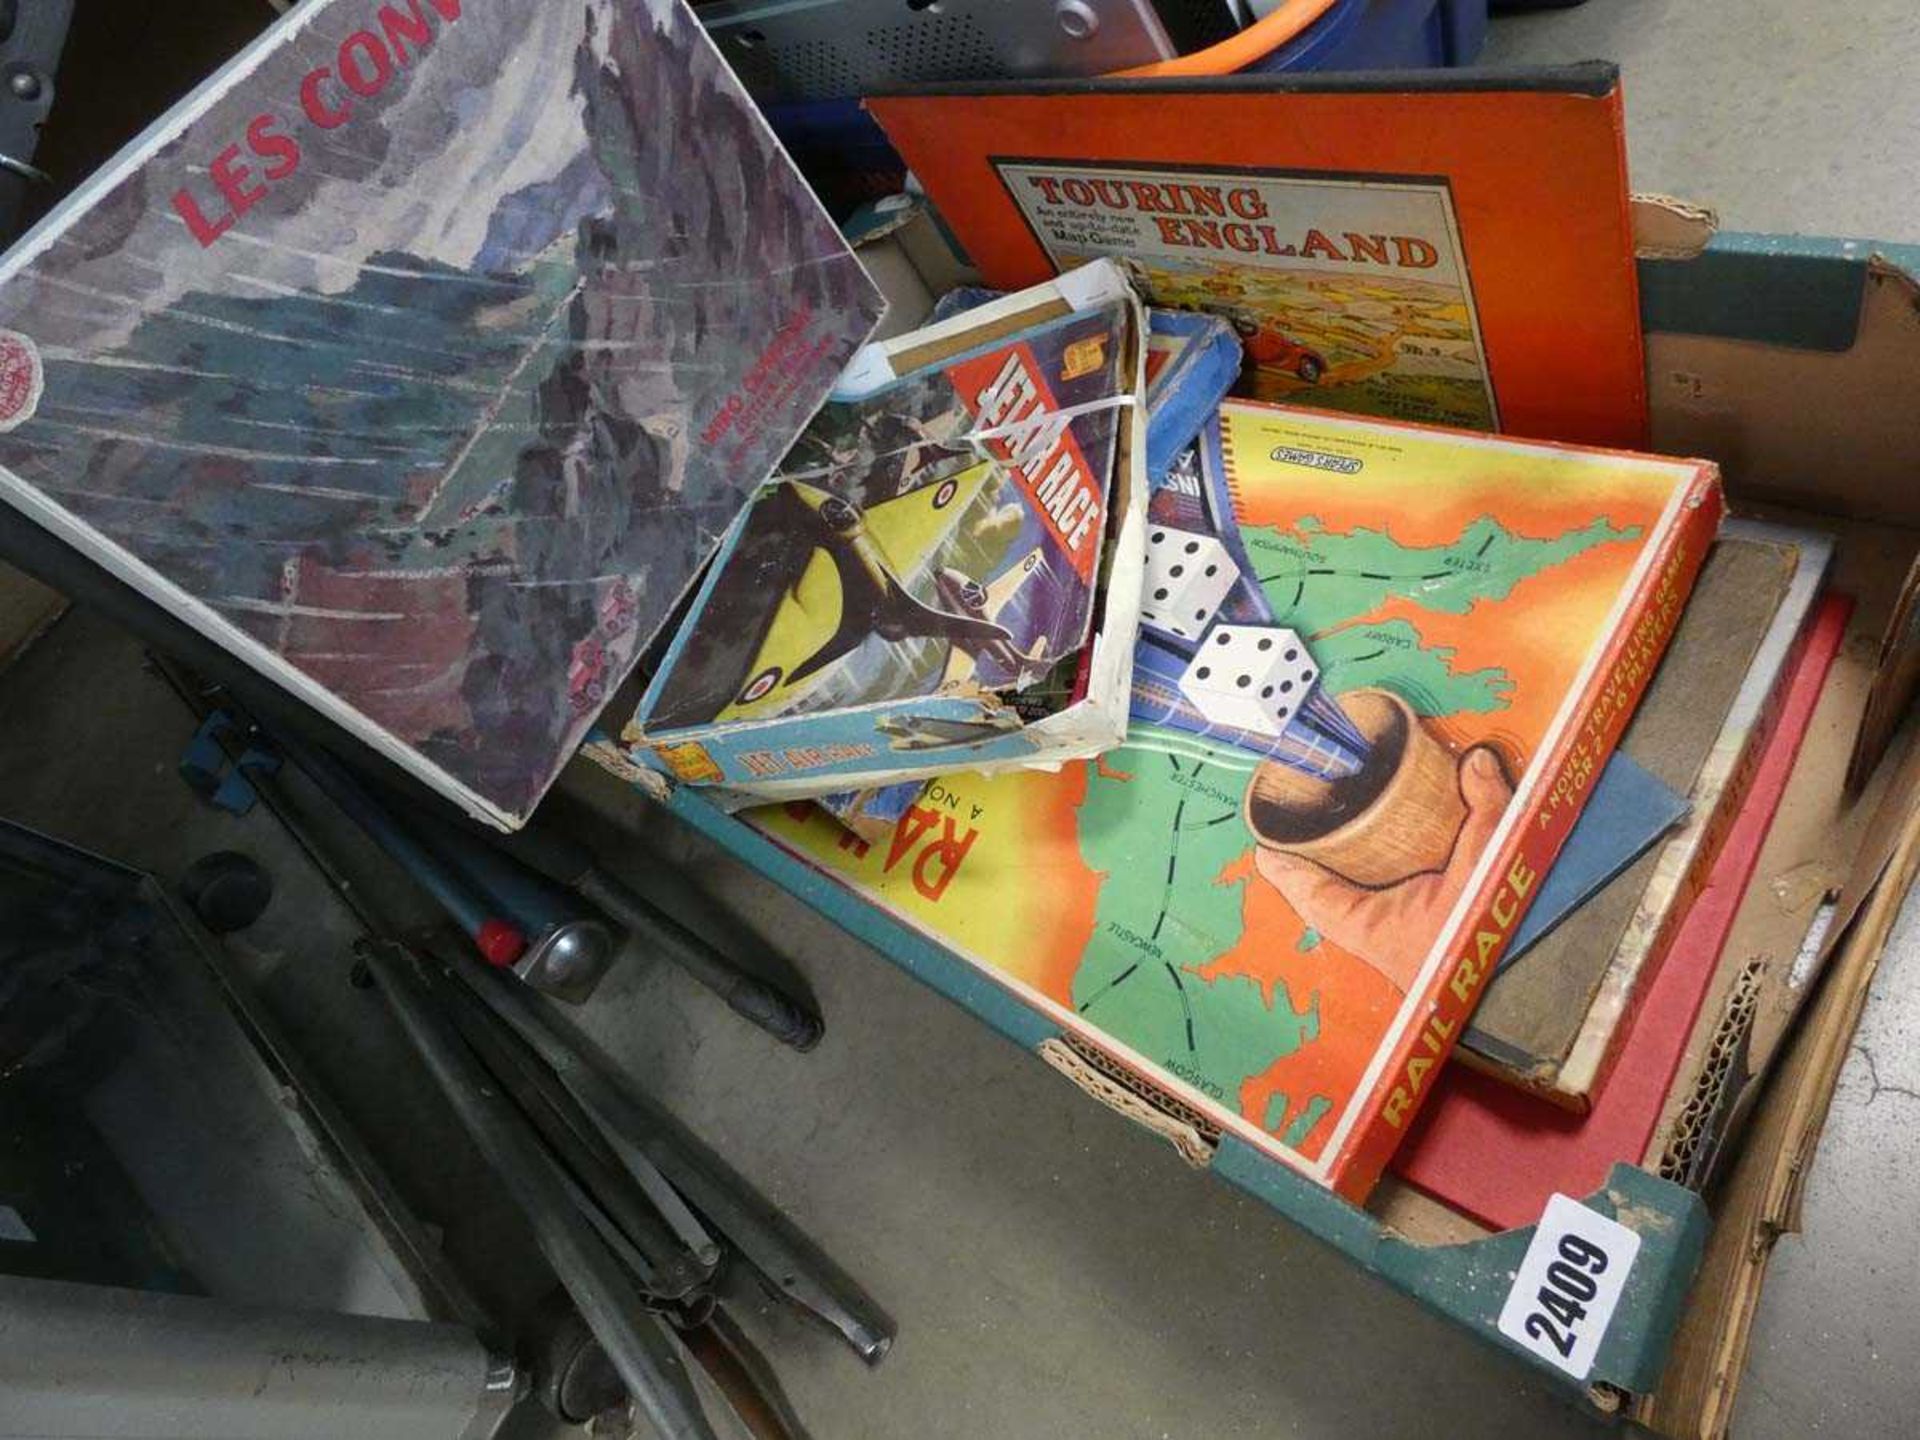 Cardboard tray containing various vintage board games